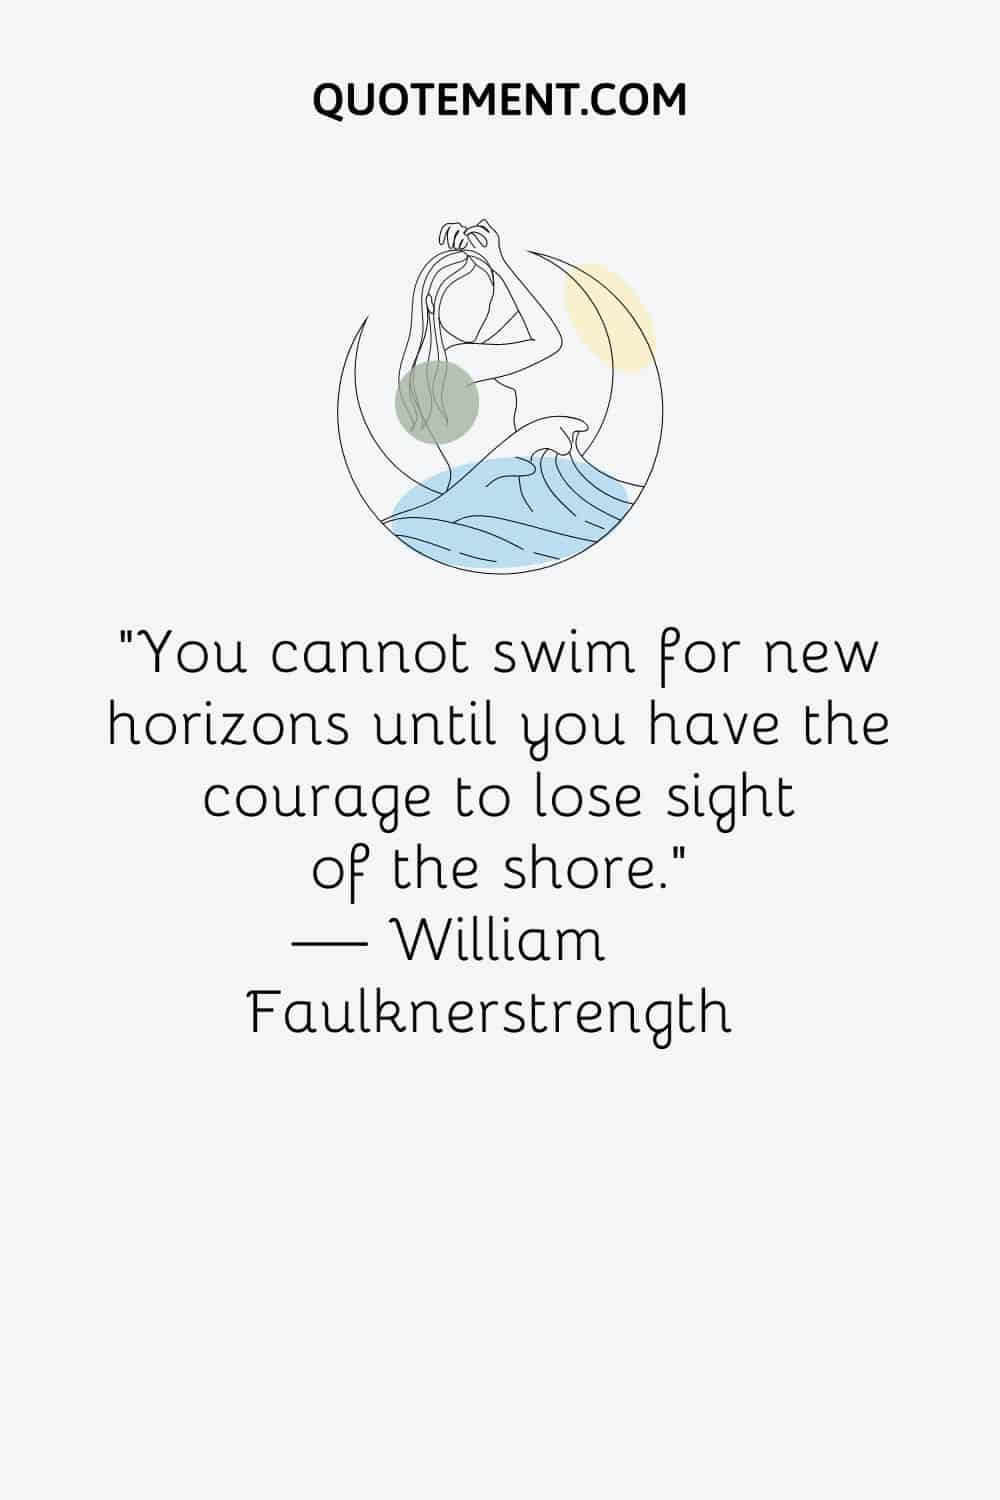 “You cannot swim for new horizons until you have the courage to lose sight of the shore.” ― William Faulknerstrength